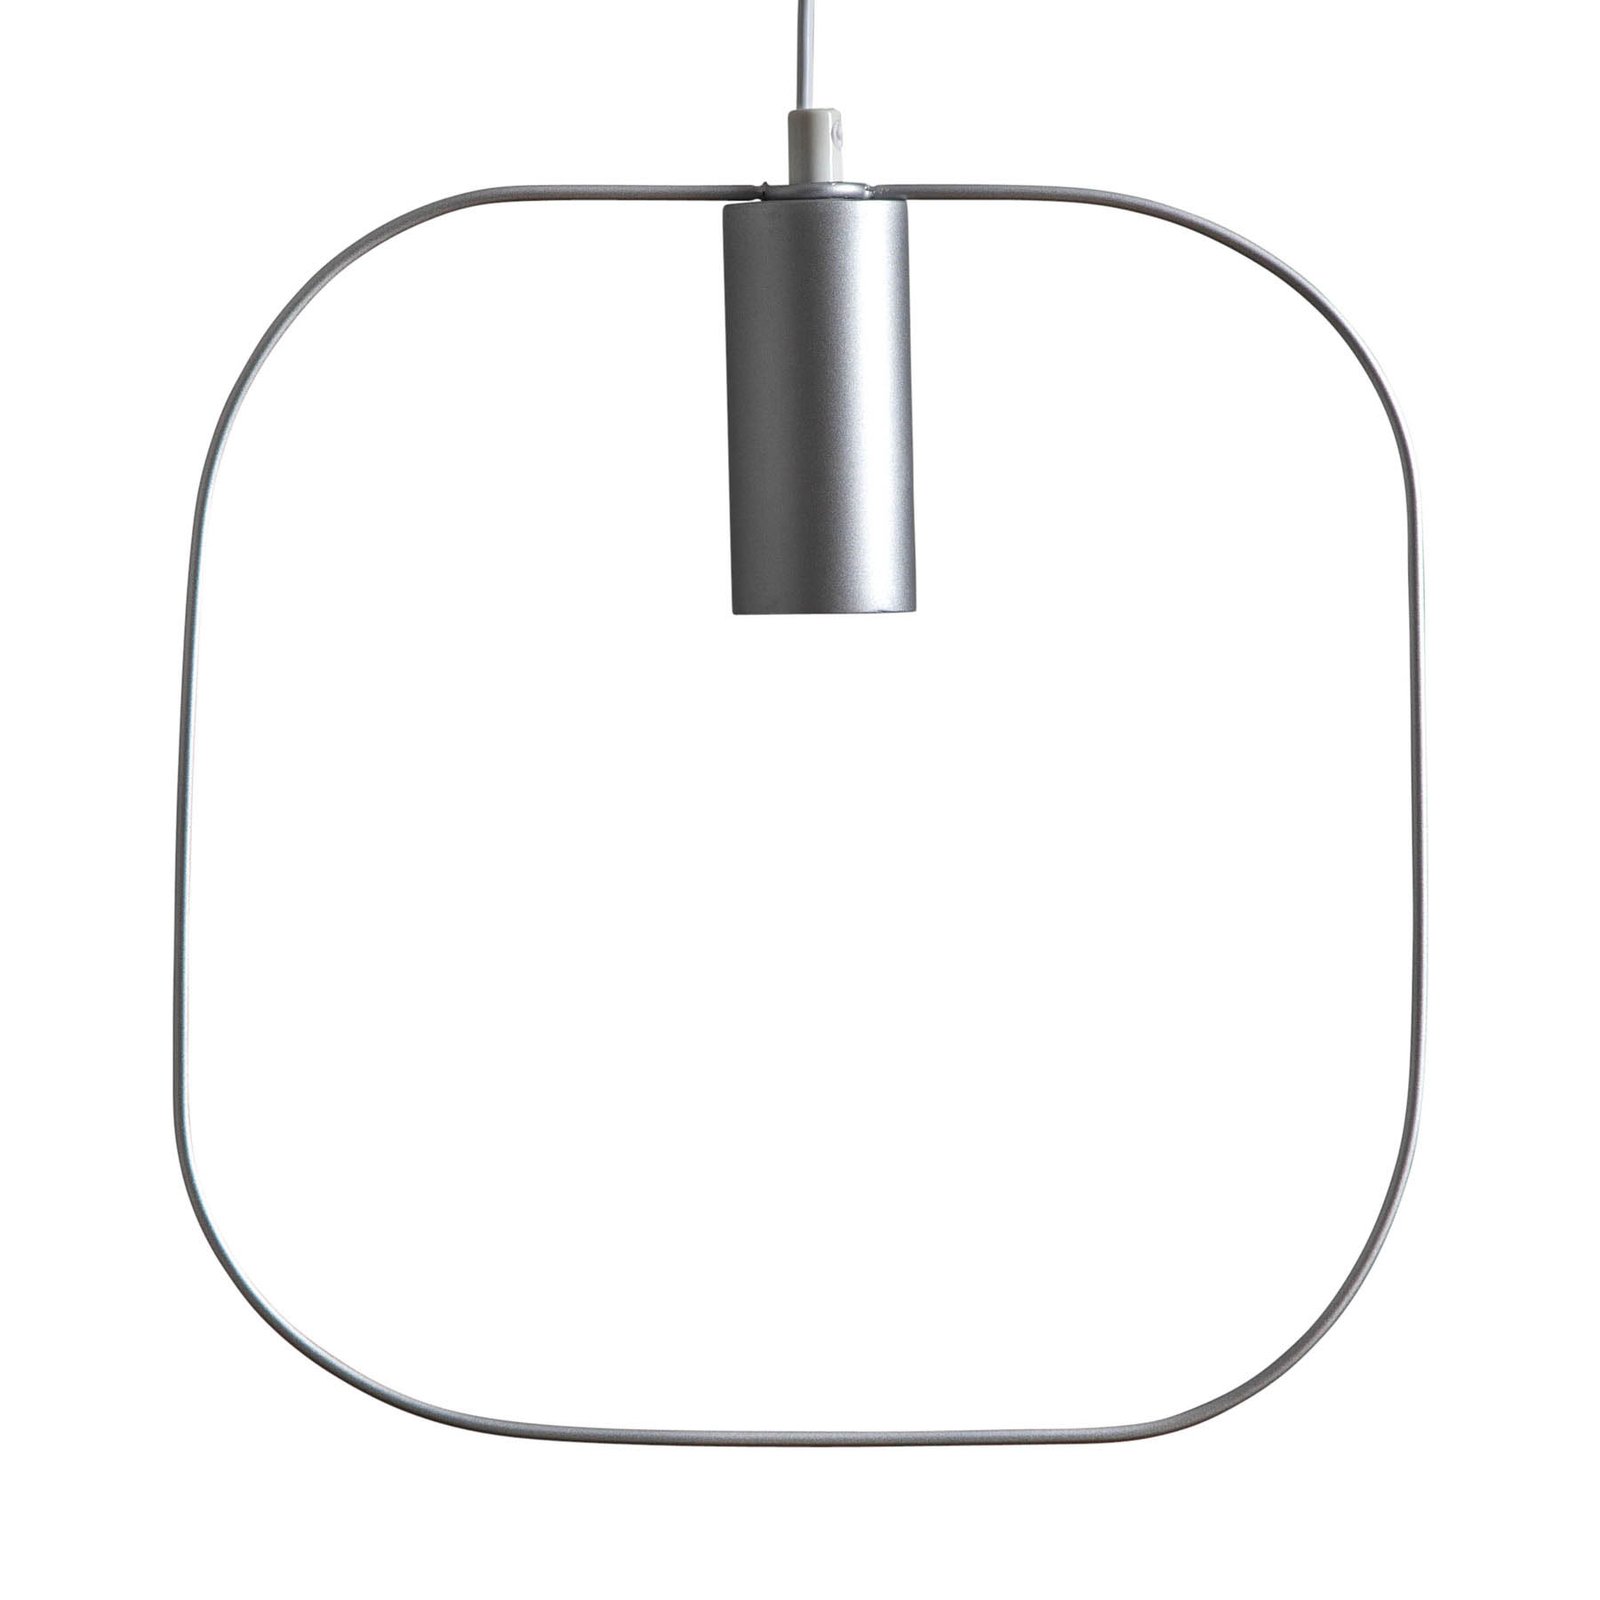 Shape decorative hanging light with square, silver